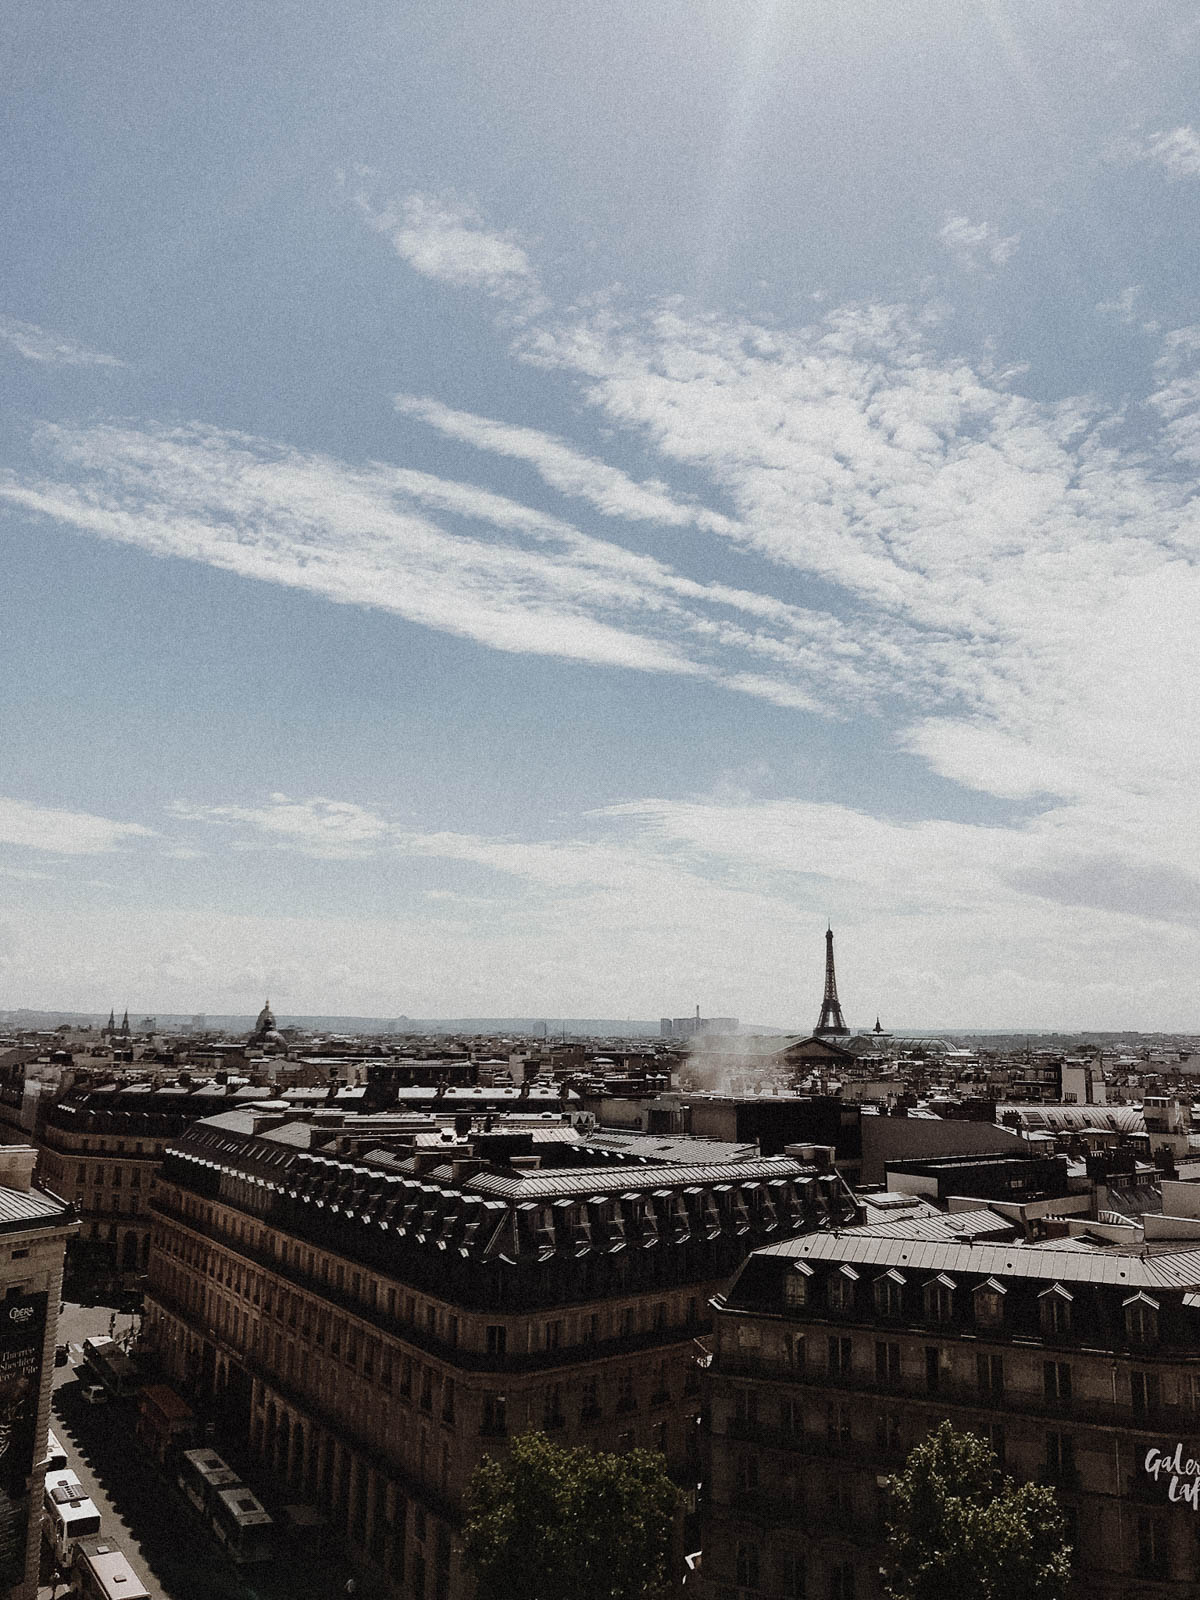 Paris France Travel Guide - Rooftop Eiffel Tower View, European Architecture and Buildings / RG Daily Blog